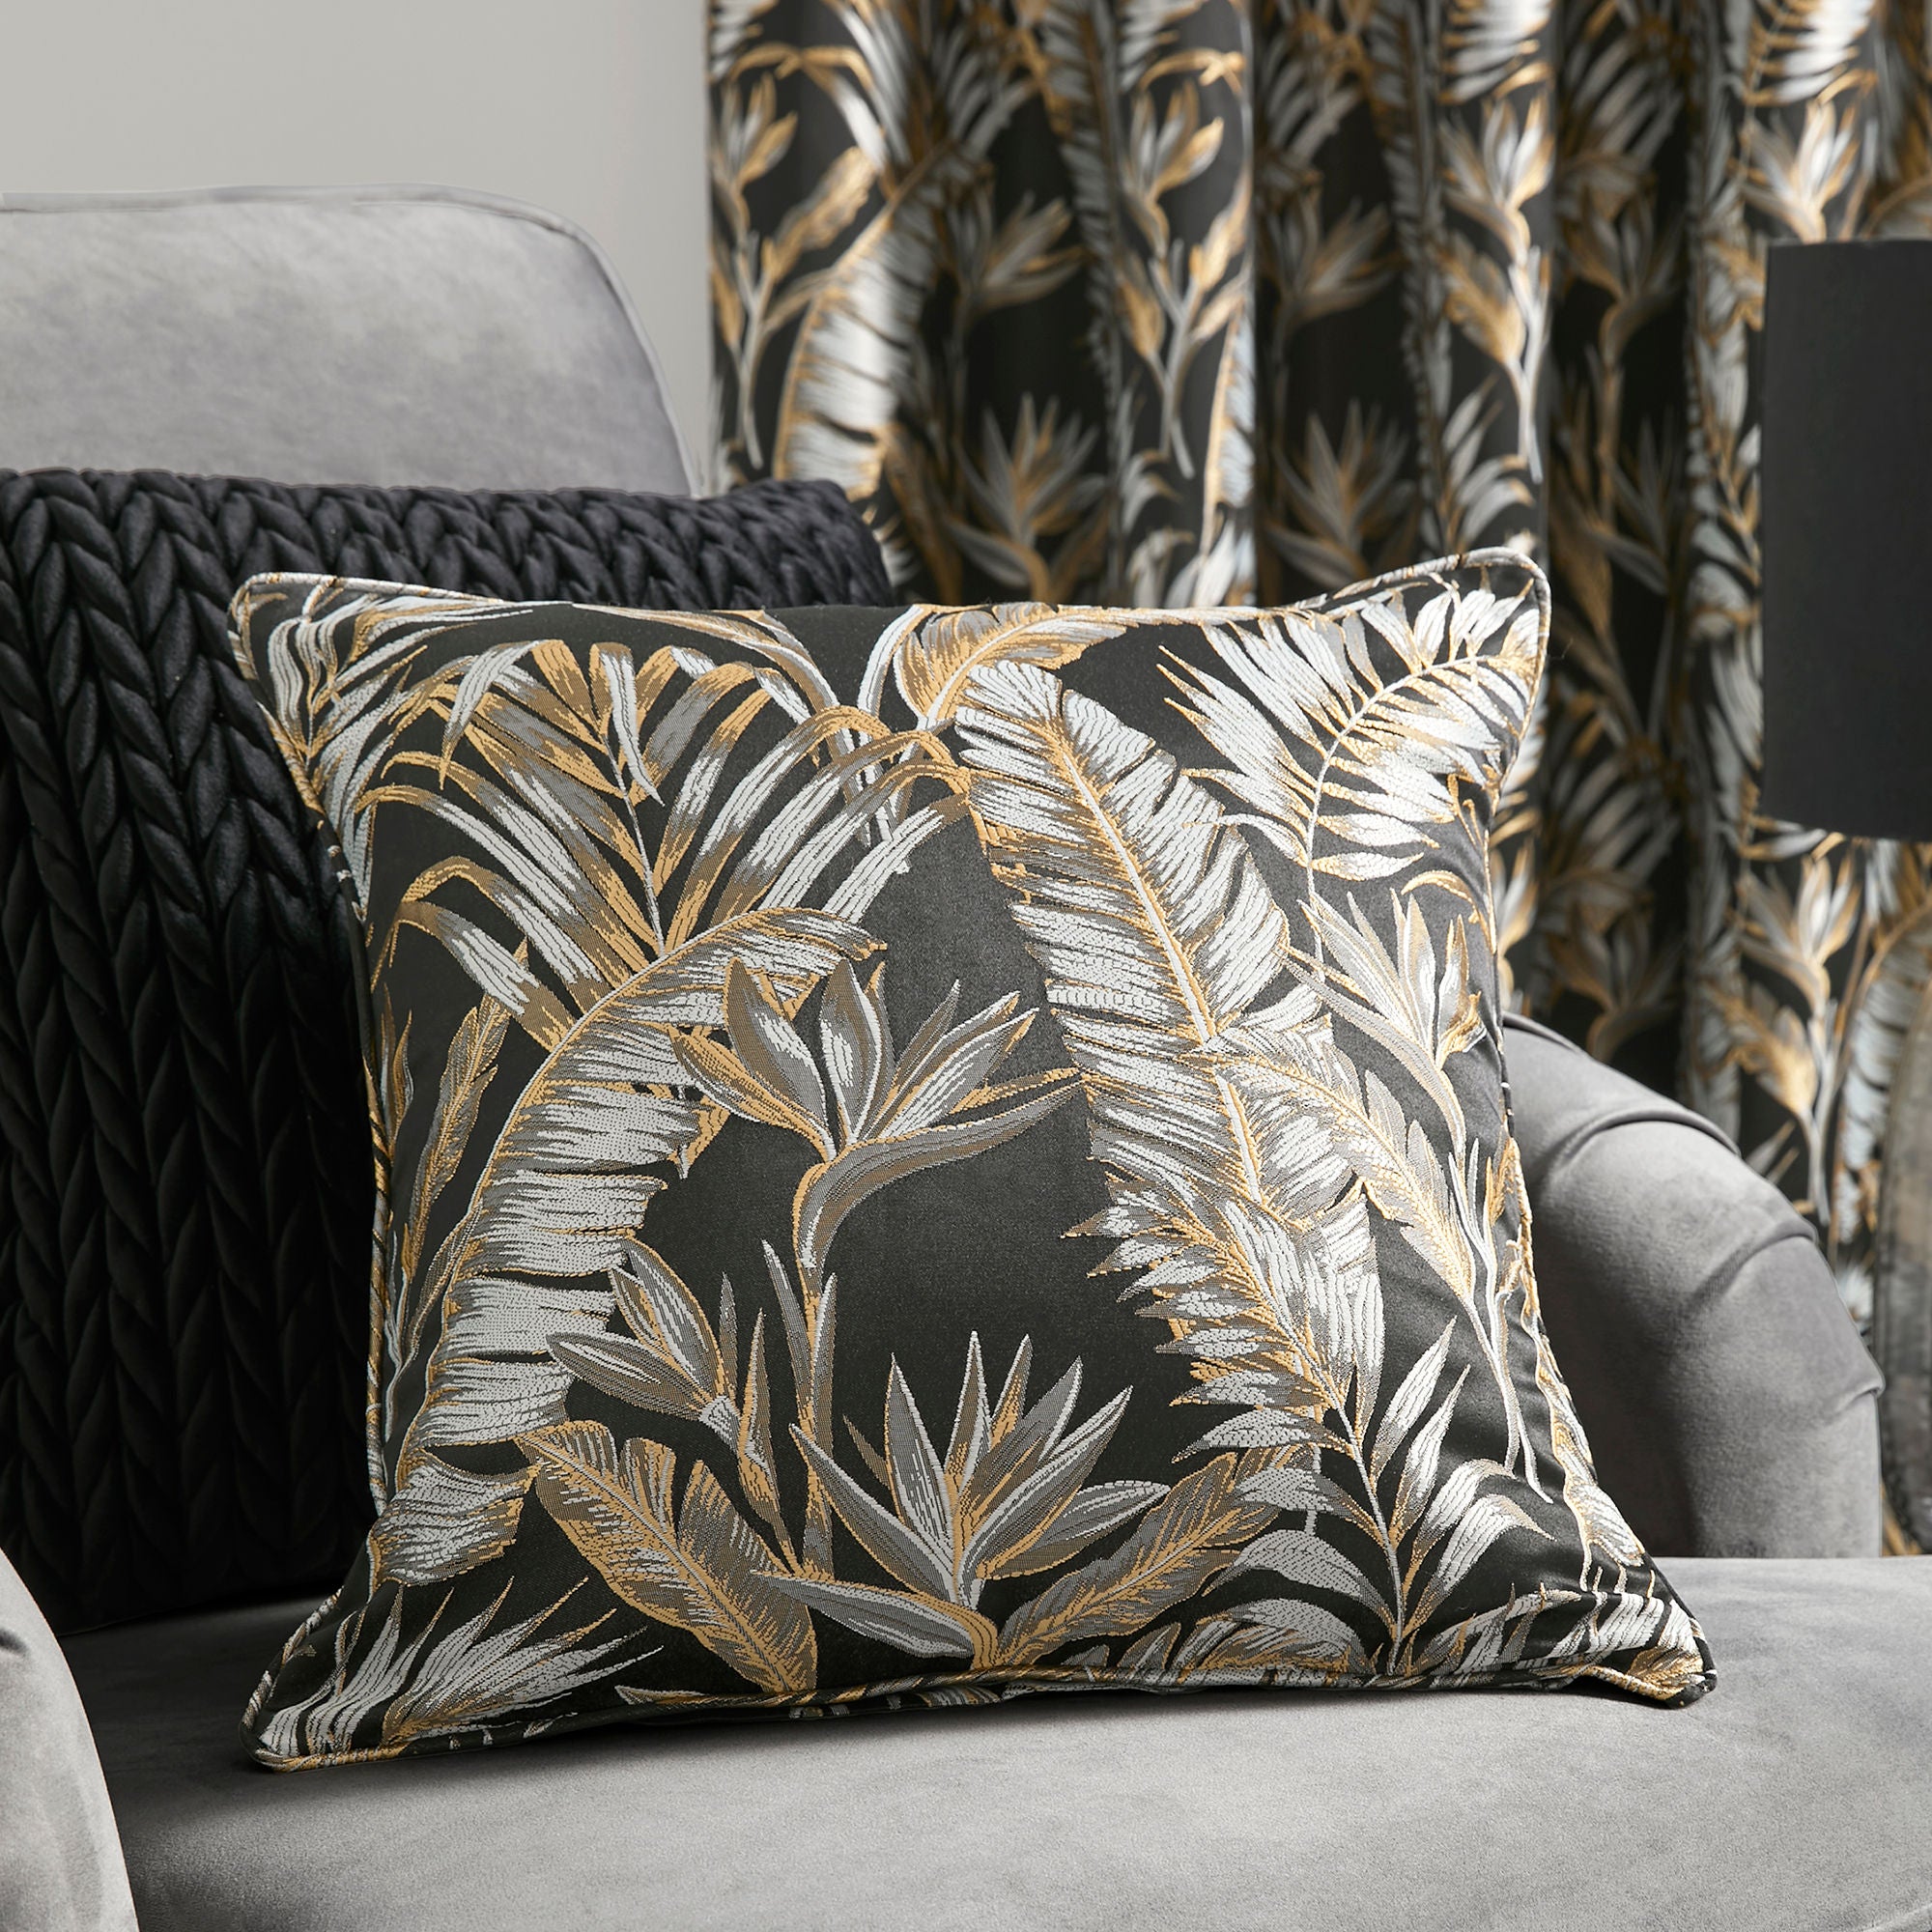 Paradise Palm Cushion by Laurence Llewelyn-Bowen in Black 43 x 43cm - Cushion - Laurence Llewelyn-Bowen